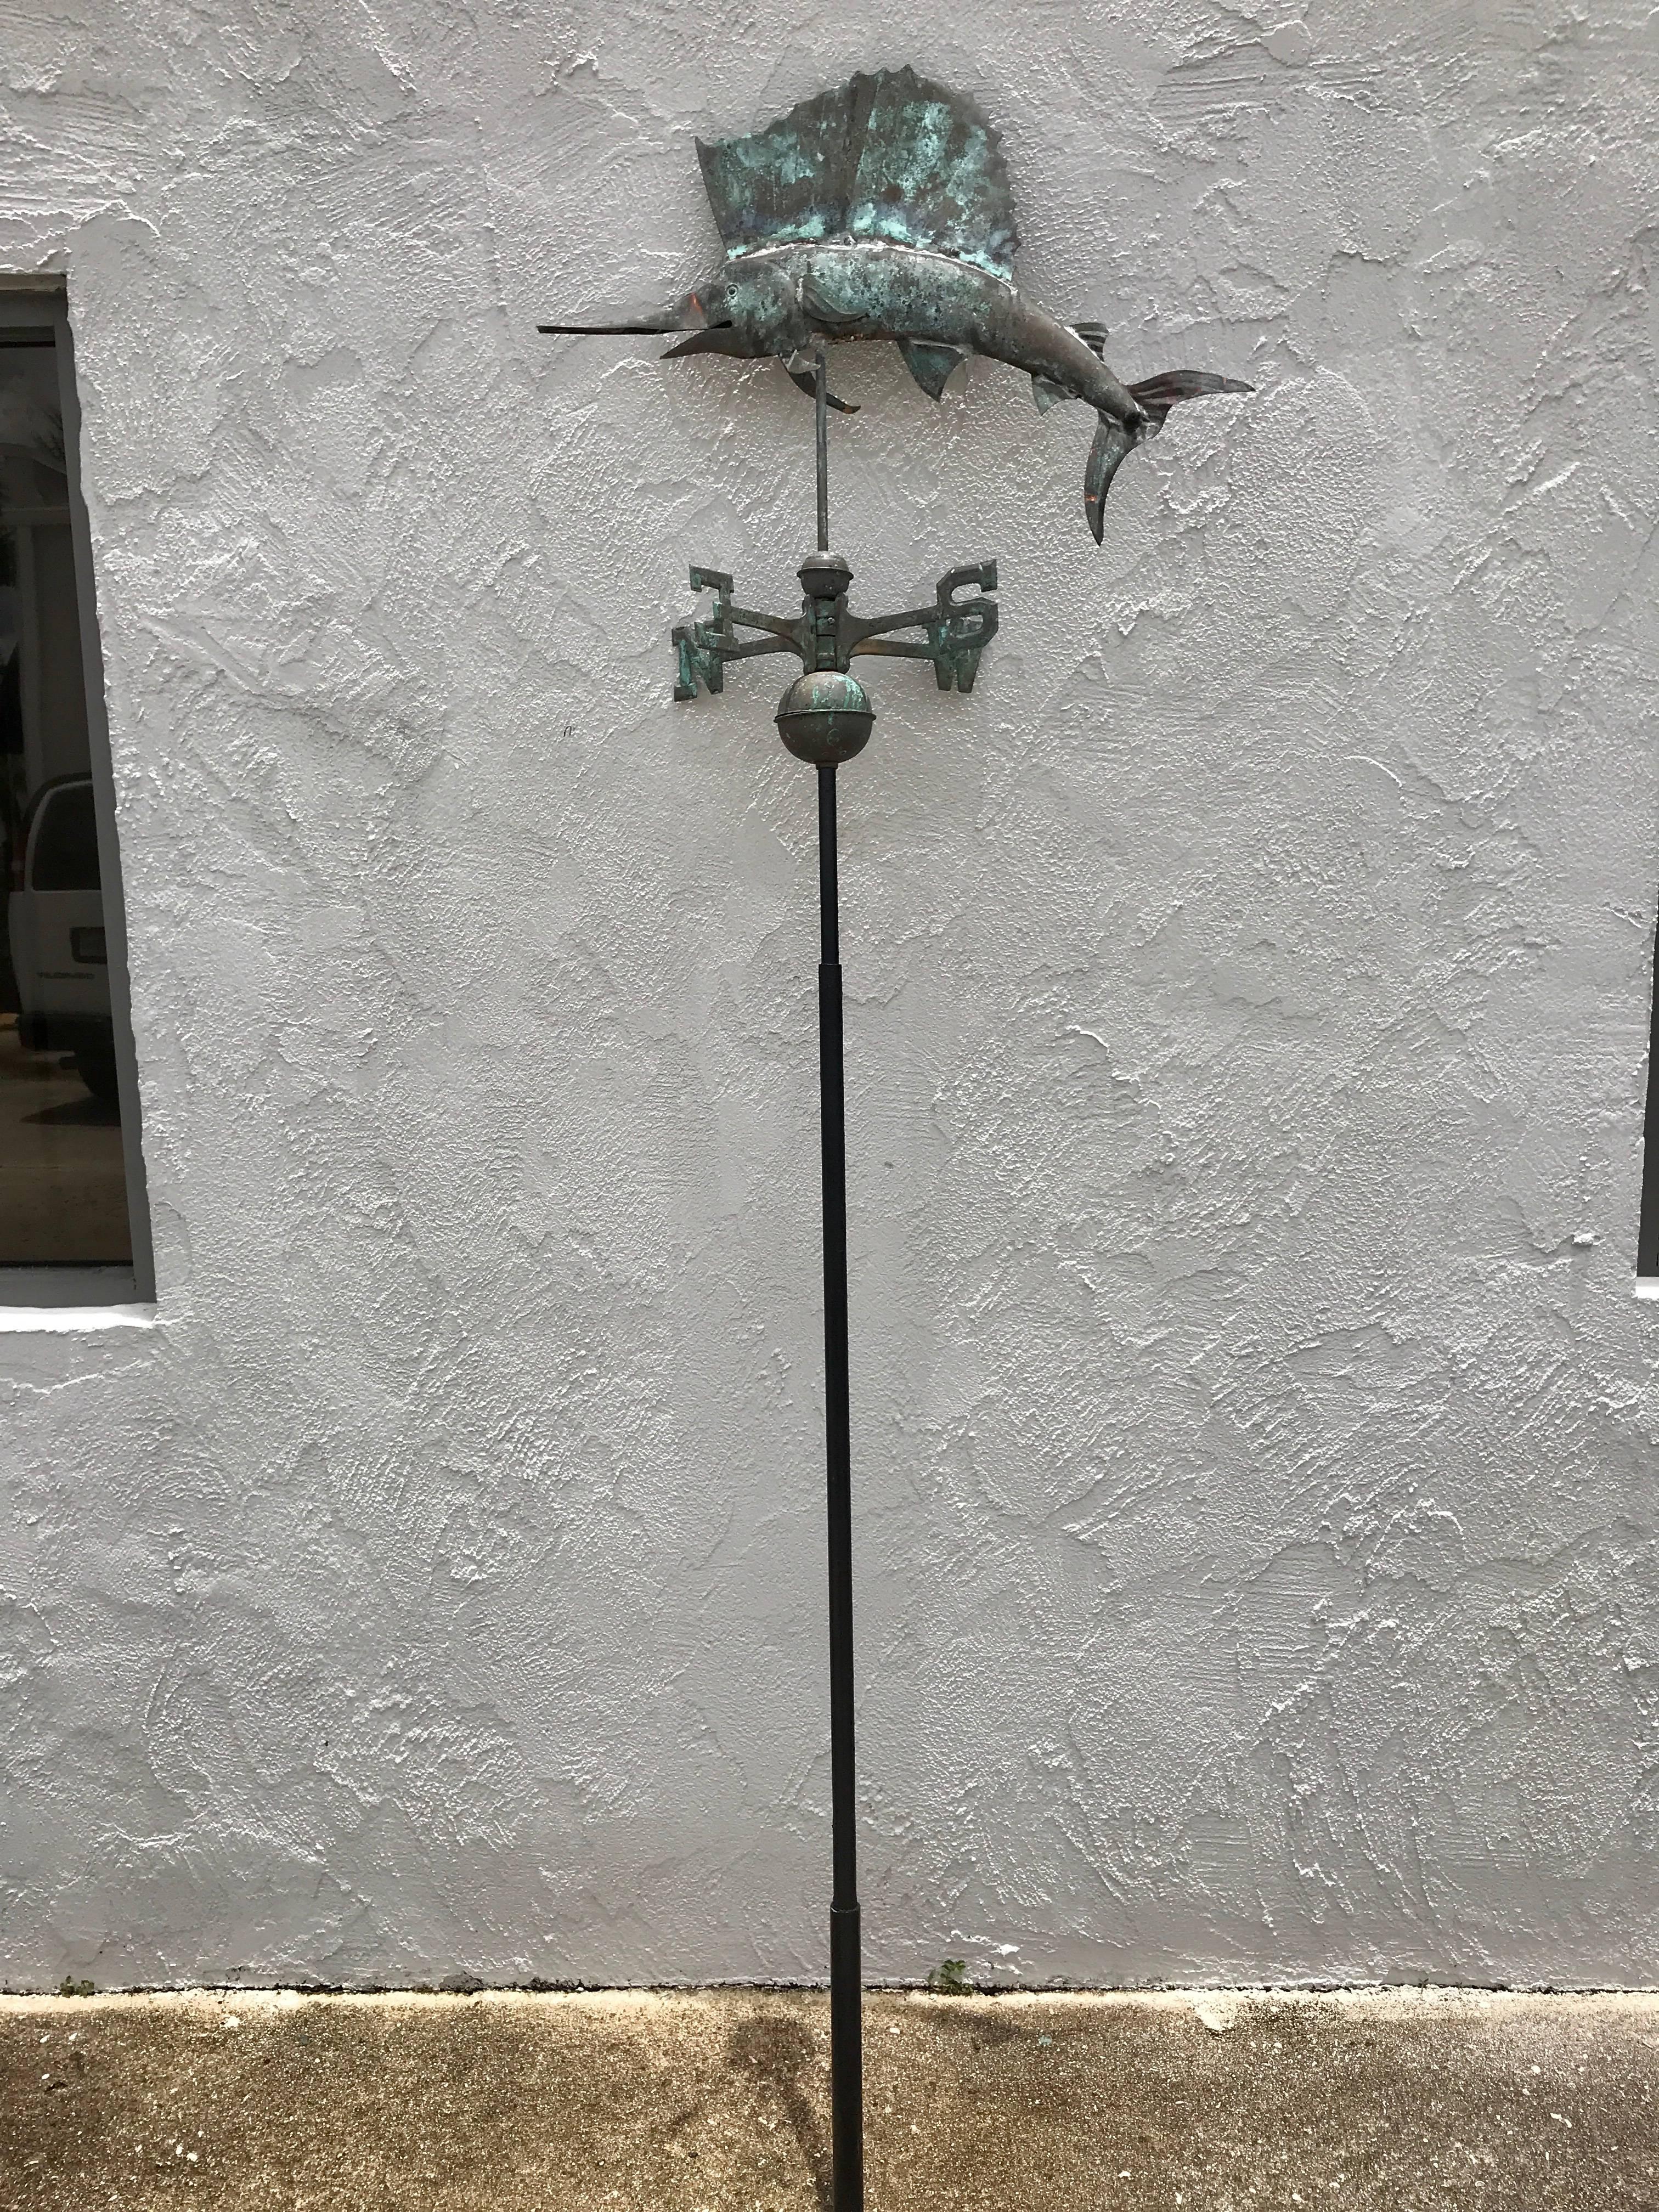 Vintage sailfish copper weather vane, finished on both sides raised on a iron pole, well sculpted, naturally distressed condition, structurally sound. Fresh from a Palm Beach Estate.